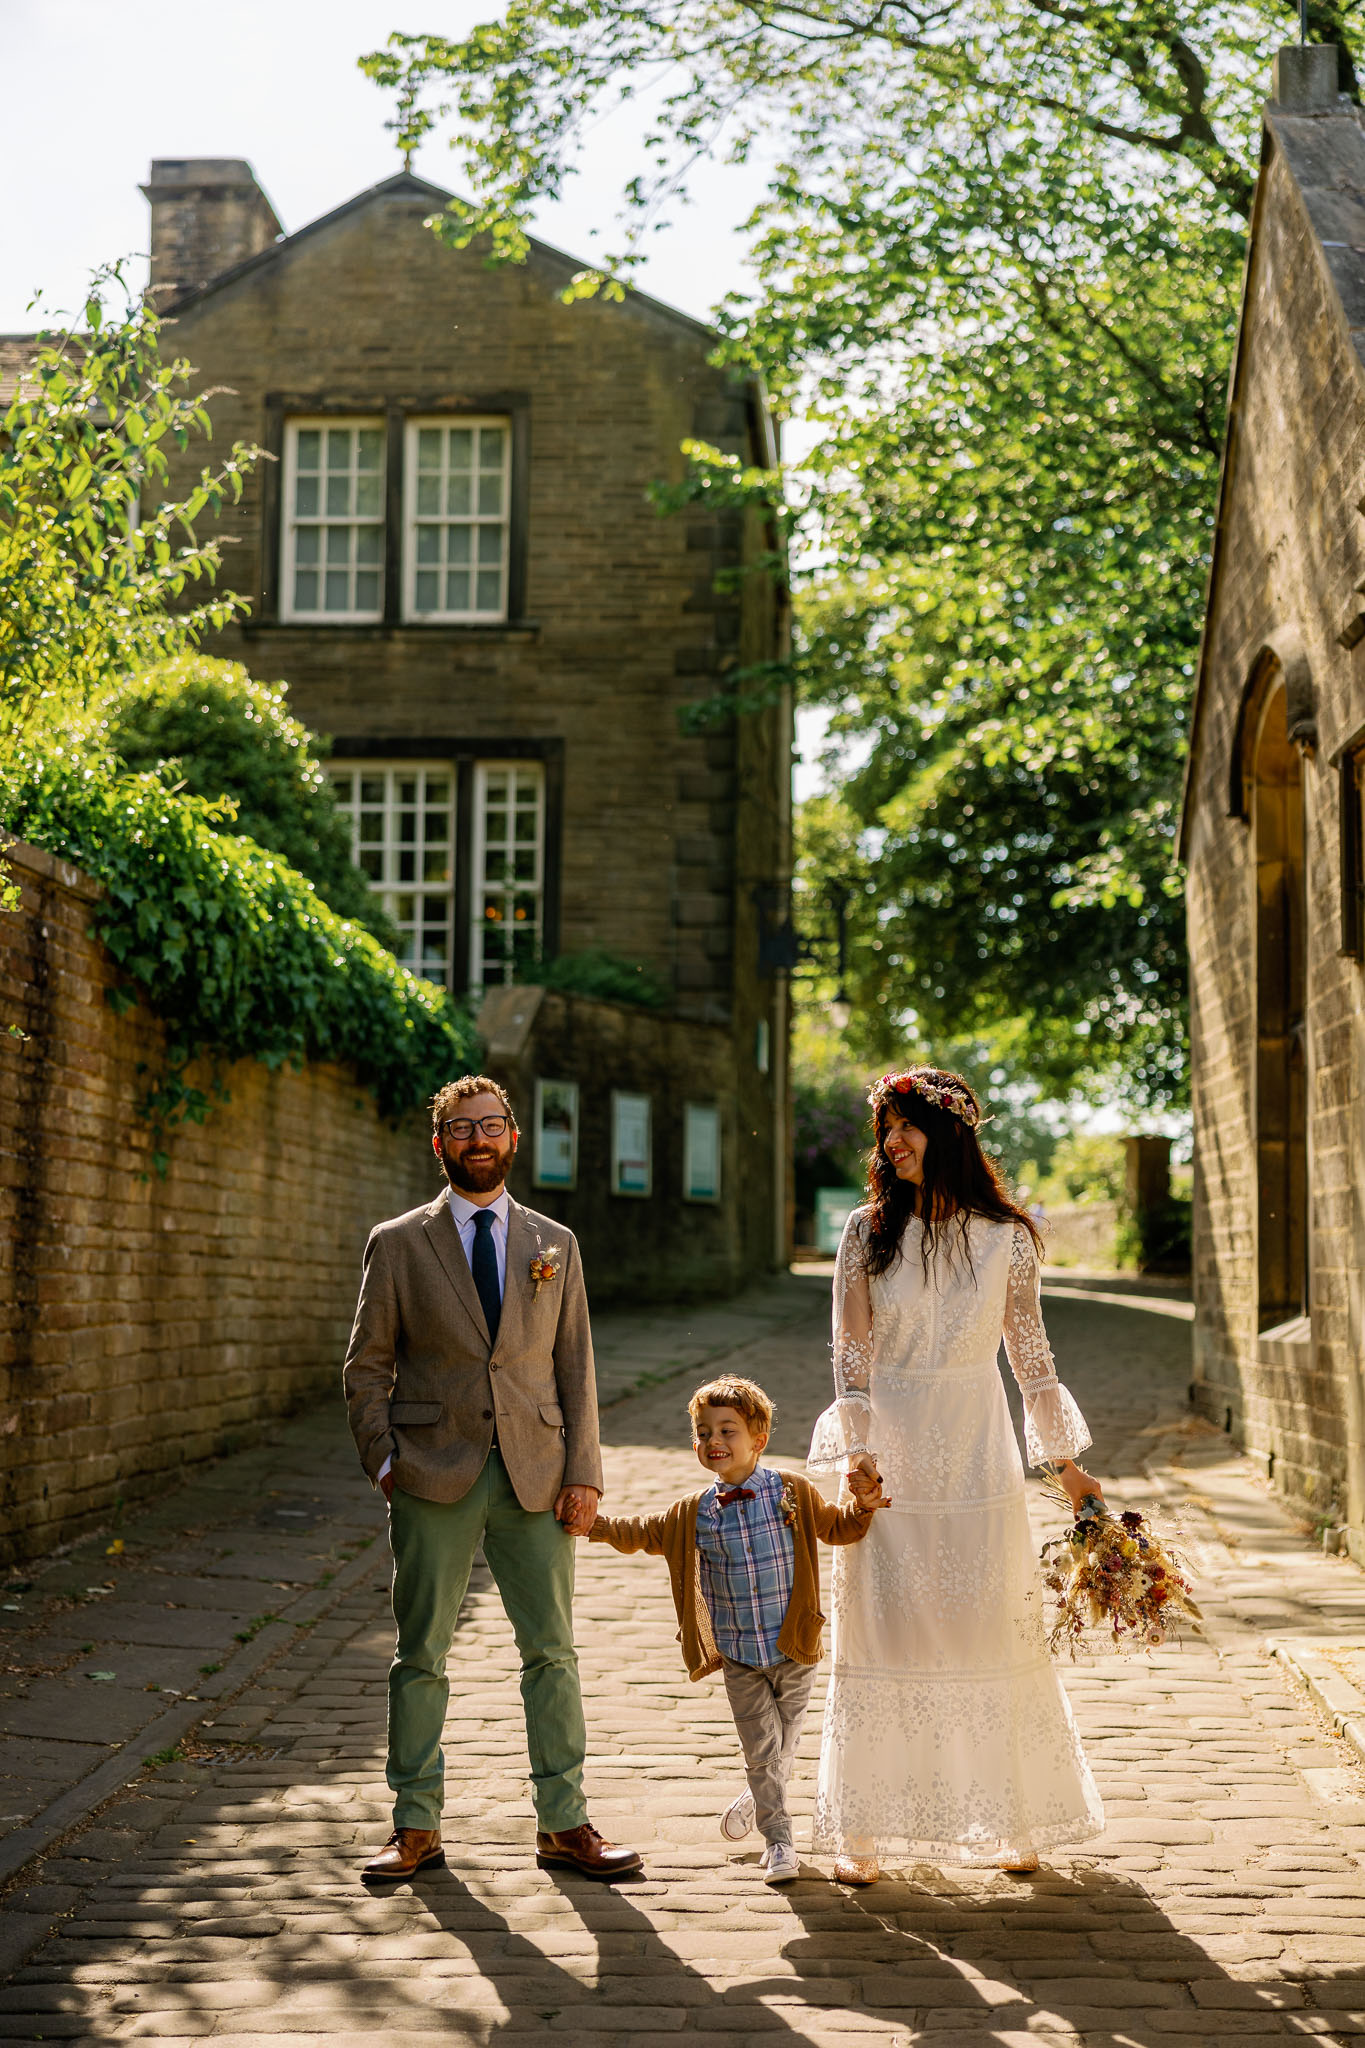 A couple walking with their son at their Haworth Wedding Blessing